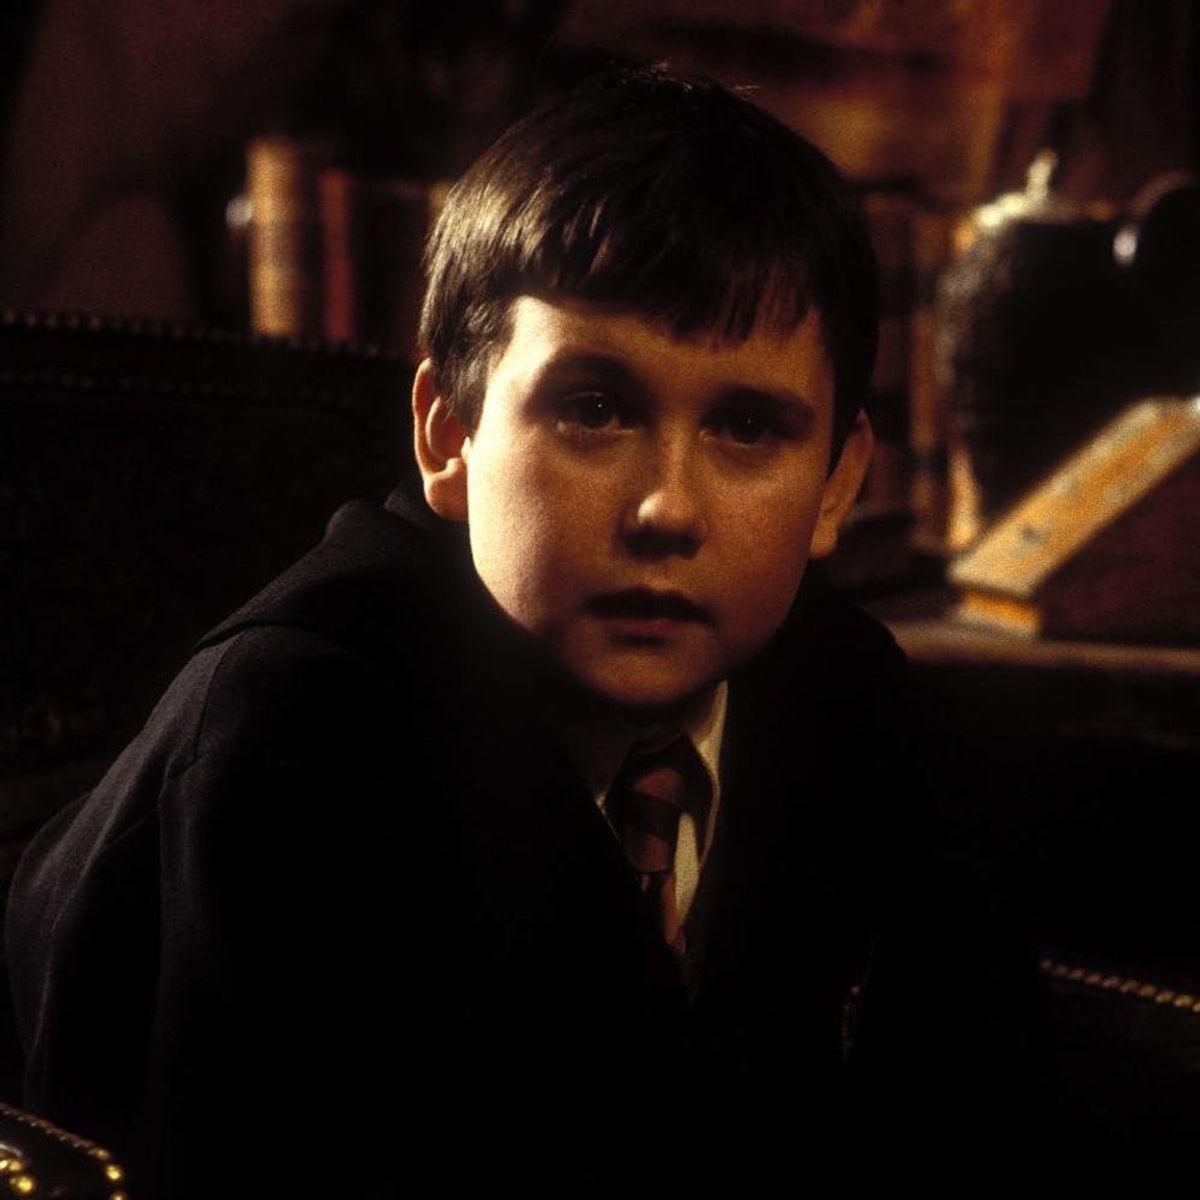 You Won’t Believe Where the Real Life Neville Longbottom Met His Future Bride